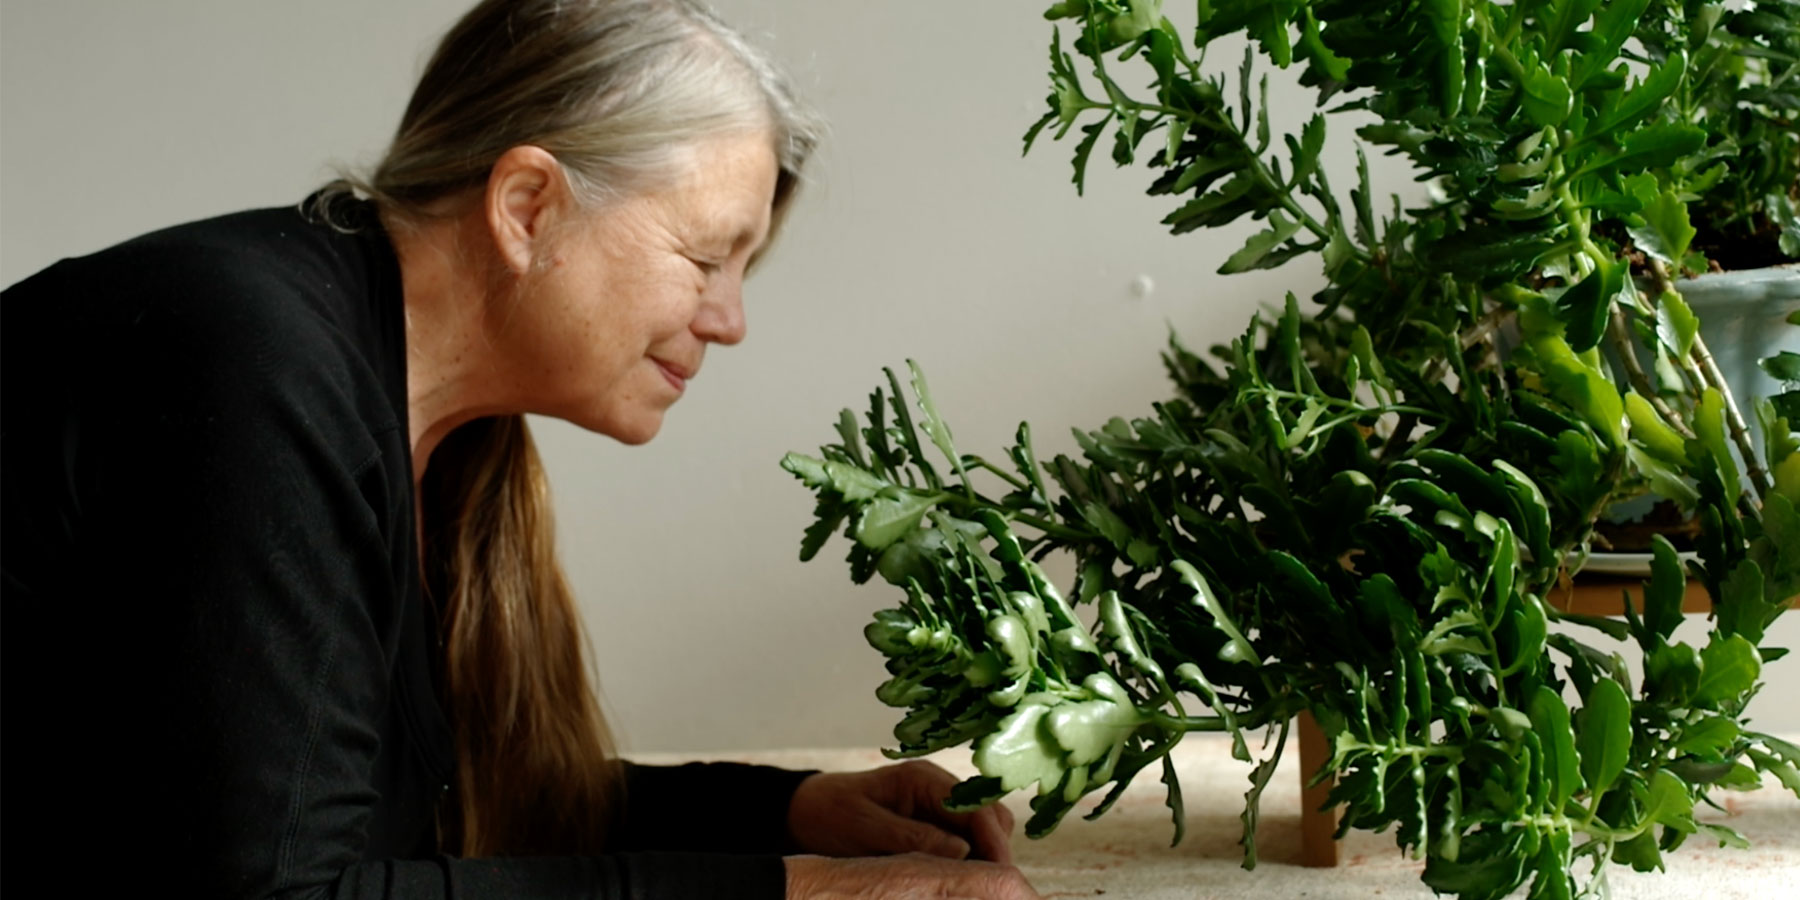 Artist Sandra Semchuk leans toward a plant with hands gently placed on the ground.